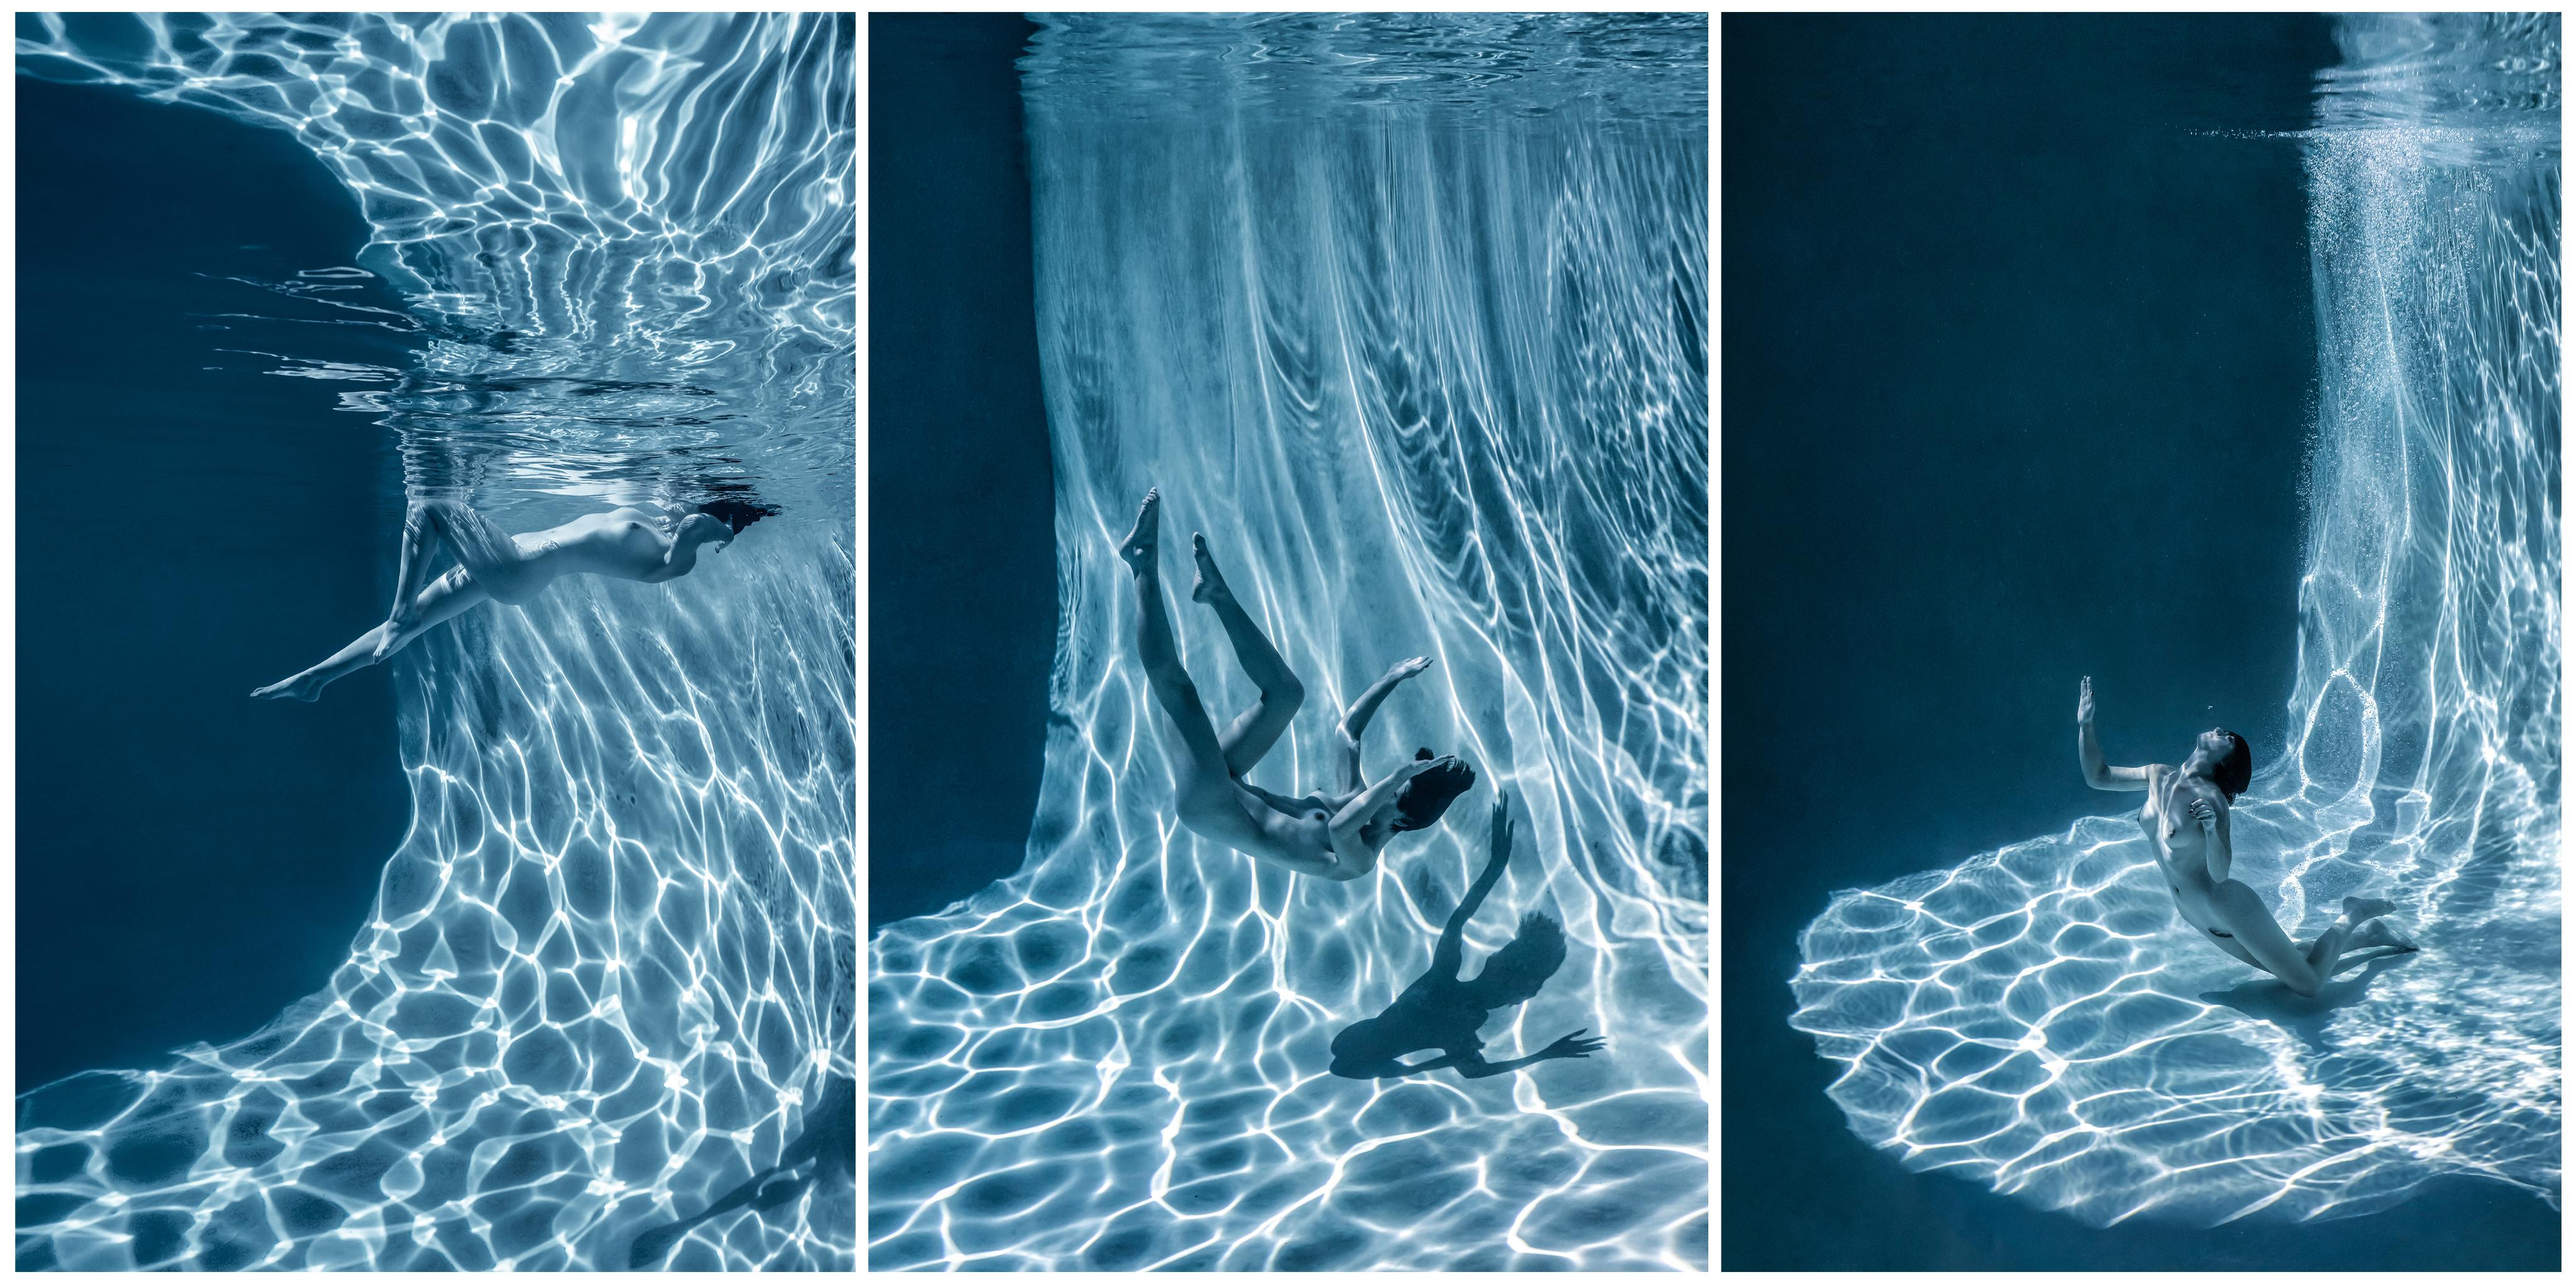 Alex Sher Nude Photograph - Marble Cave (blue triptych) - underwater nude photograph - 3 prints 35"x23" each